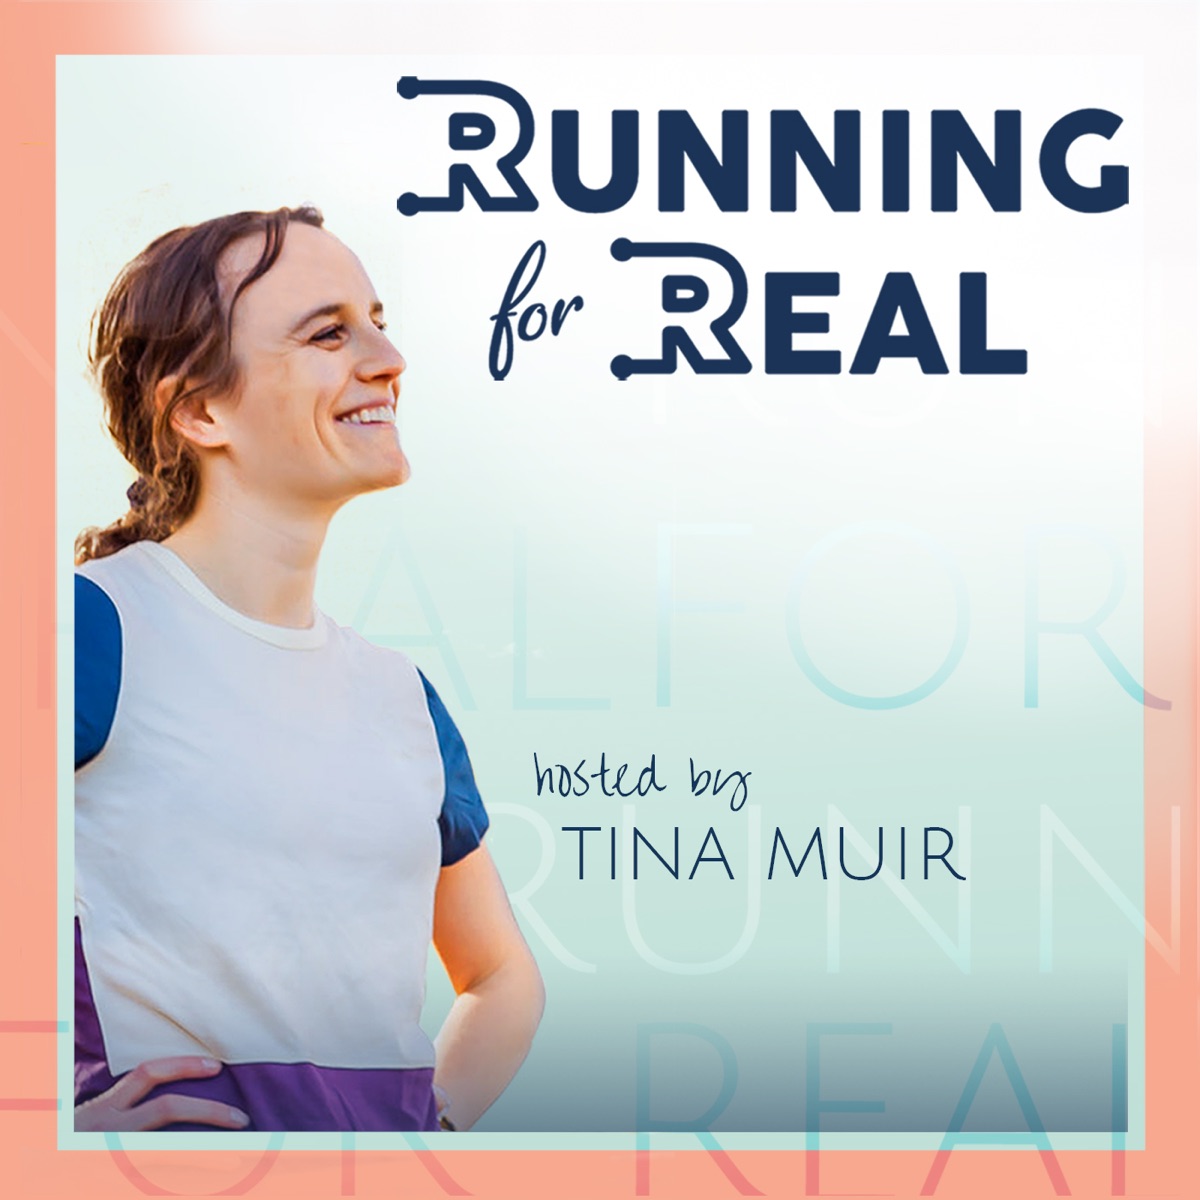 The Running for Real Podcast